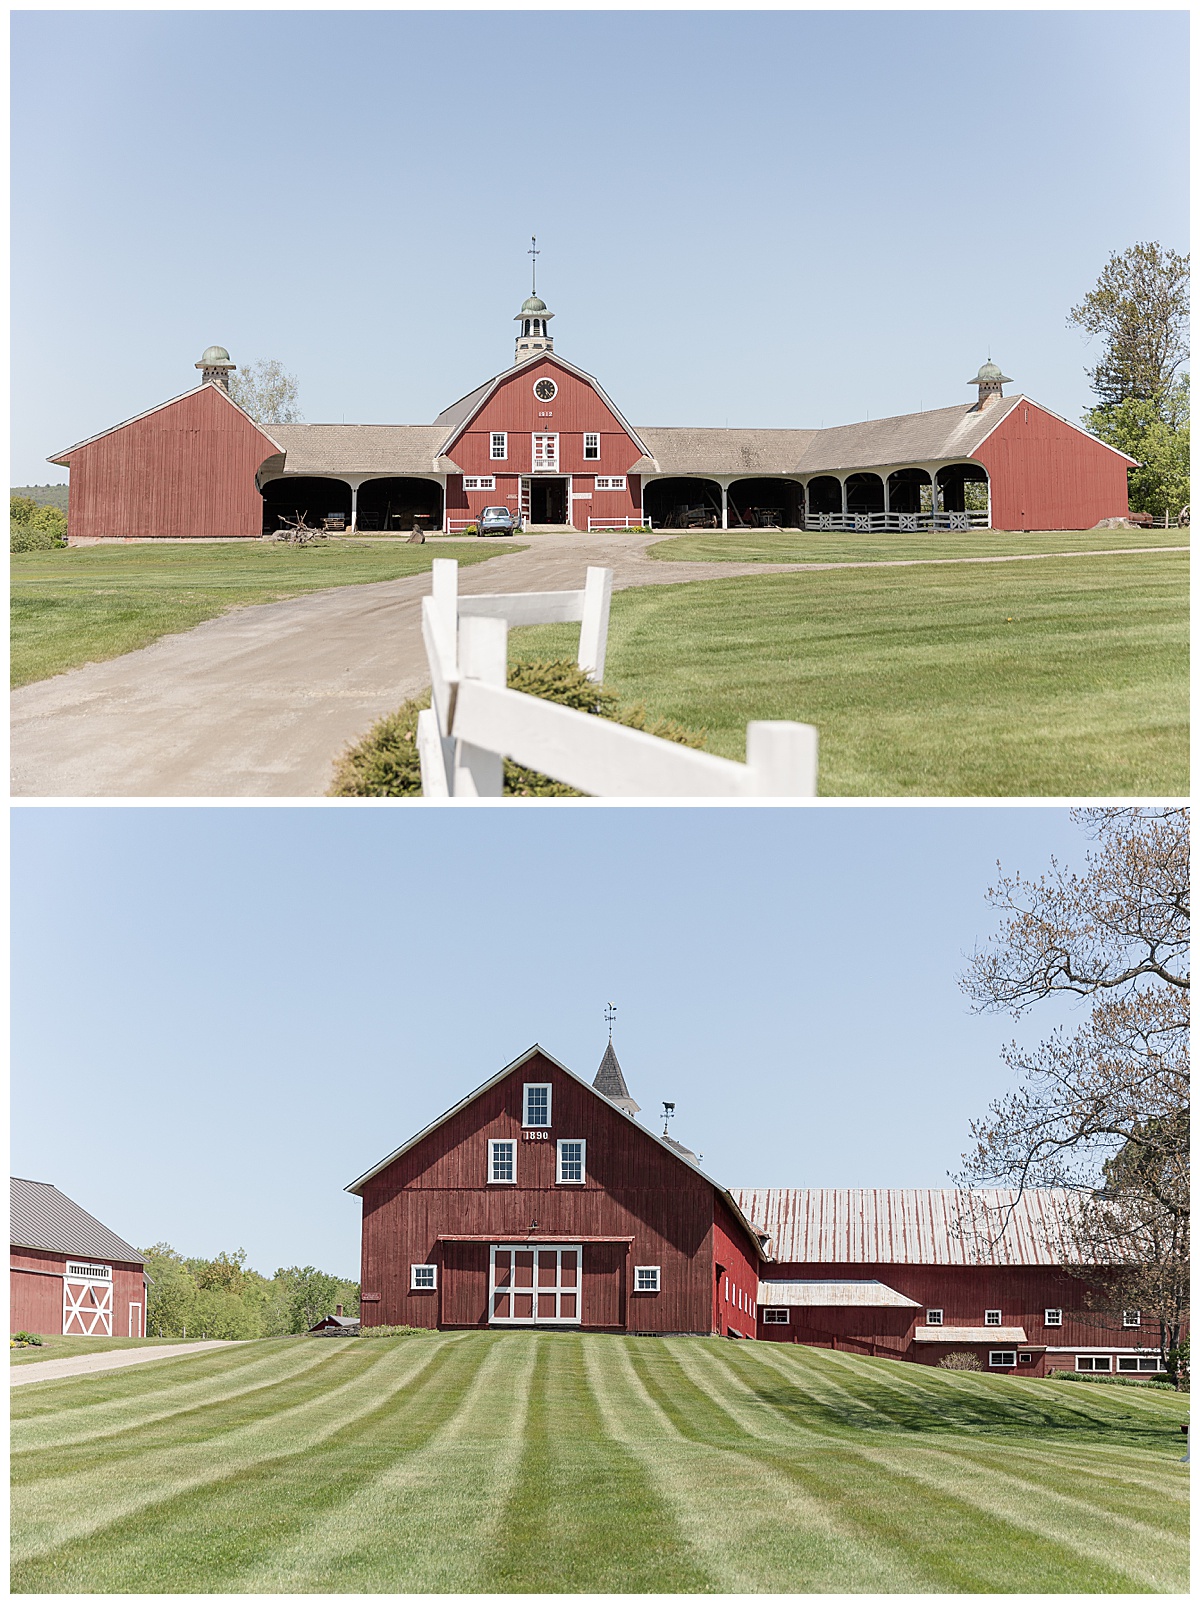 The Large red barn at the Inn at Mountain View stands tall over the lush green lawns of this Vermont Wedding Venue. 